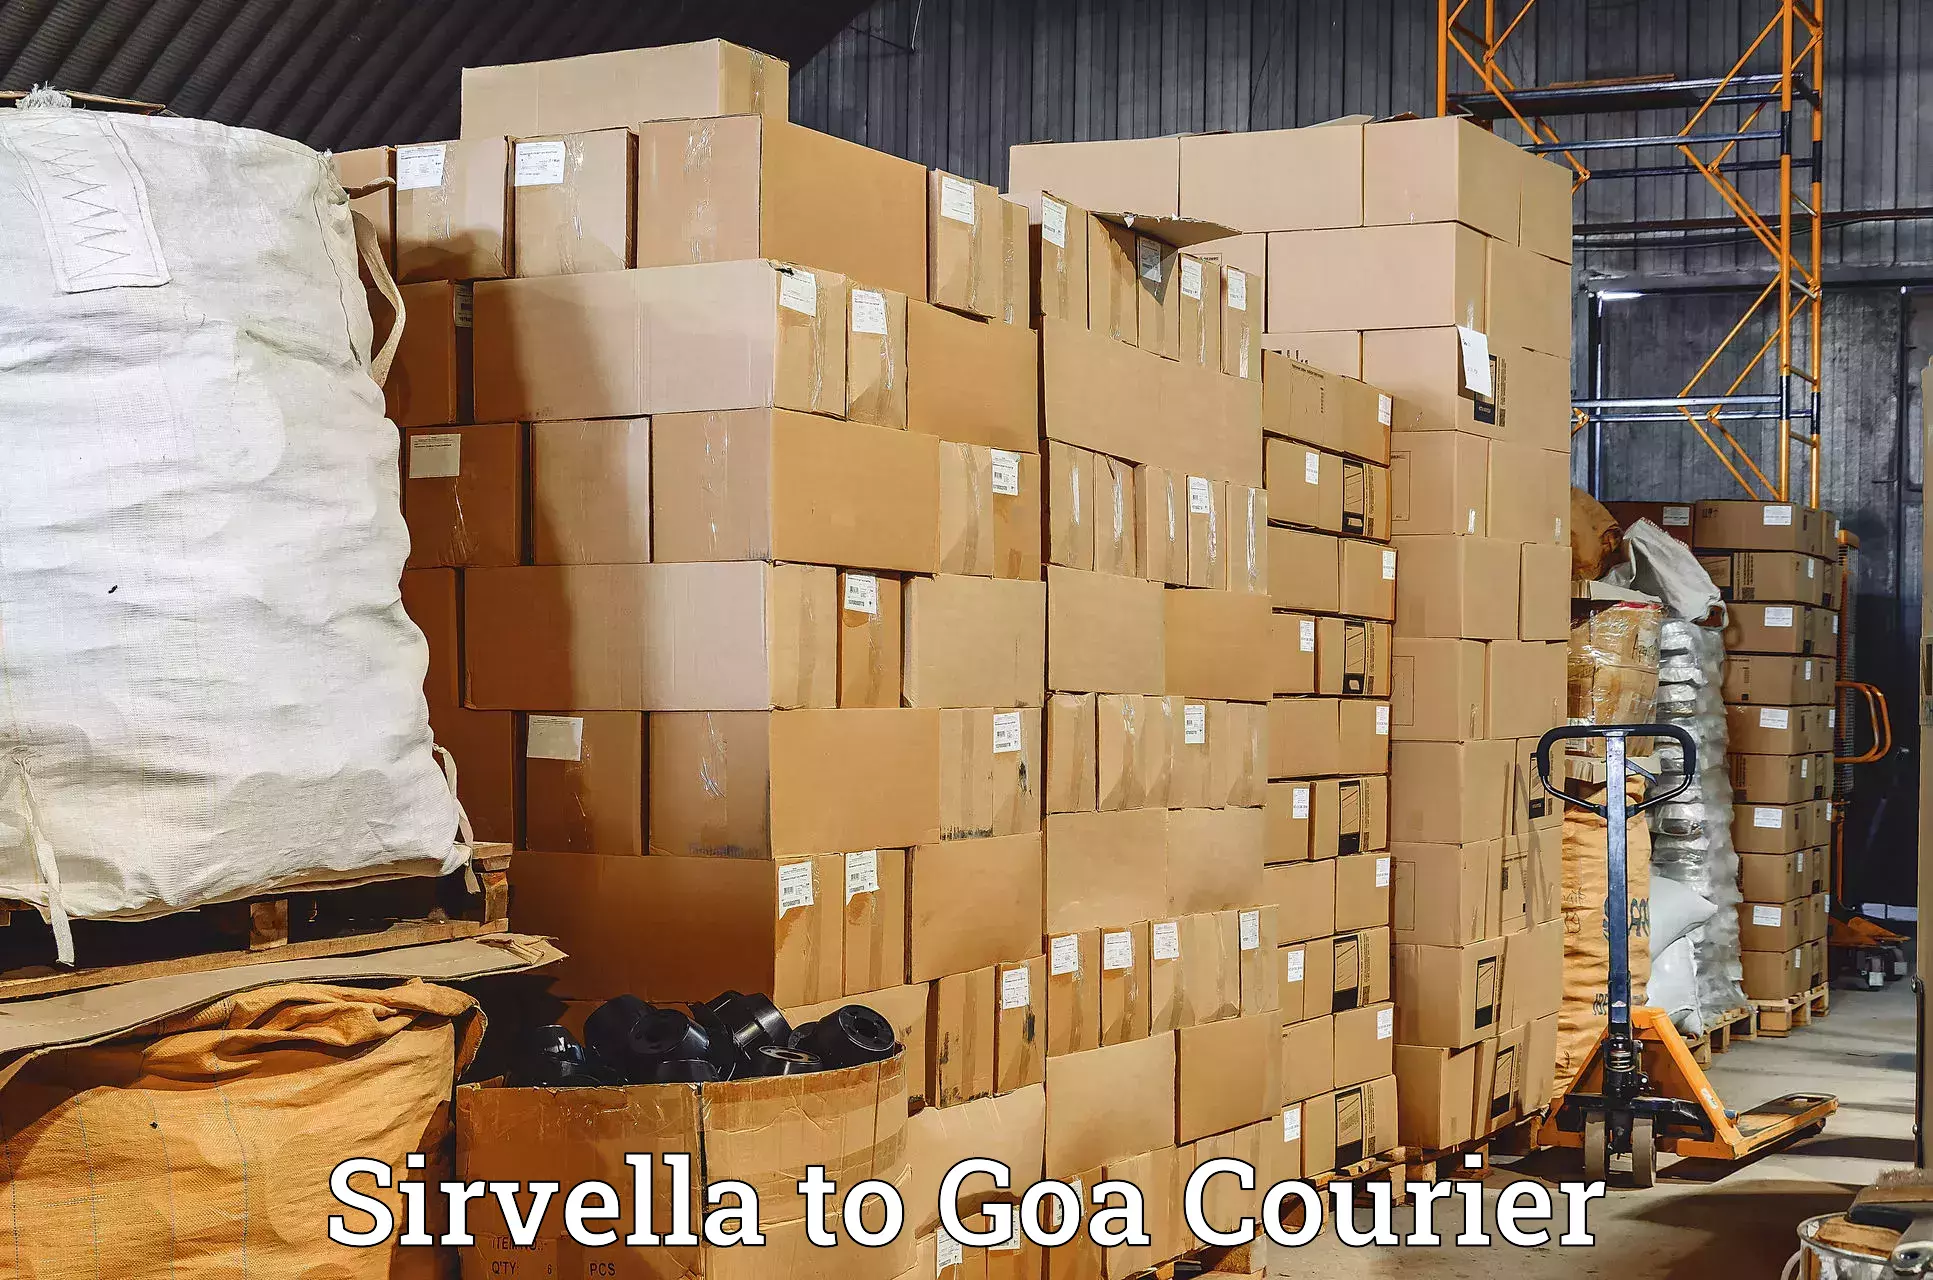 Reliable courier service in Sirvella to Goa